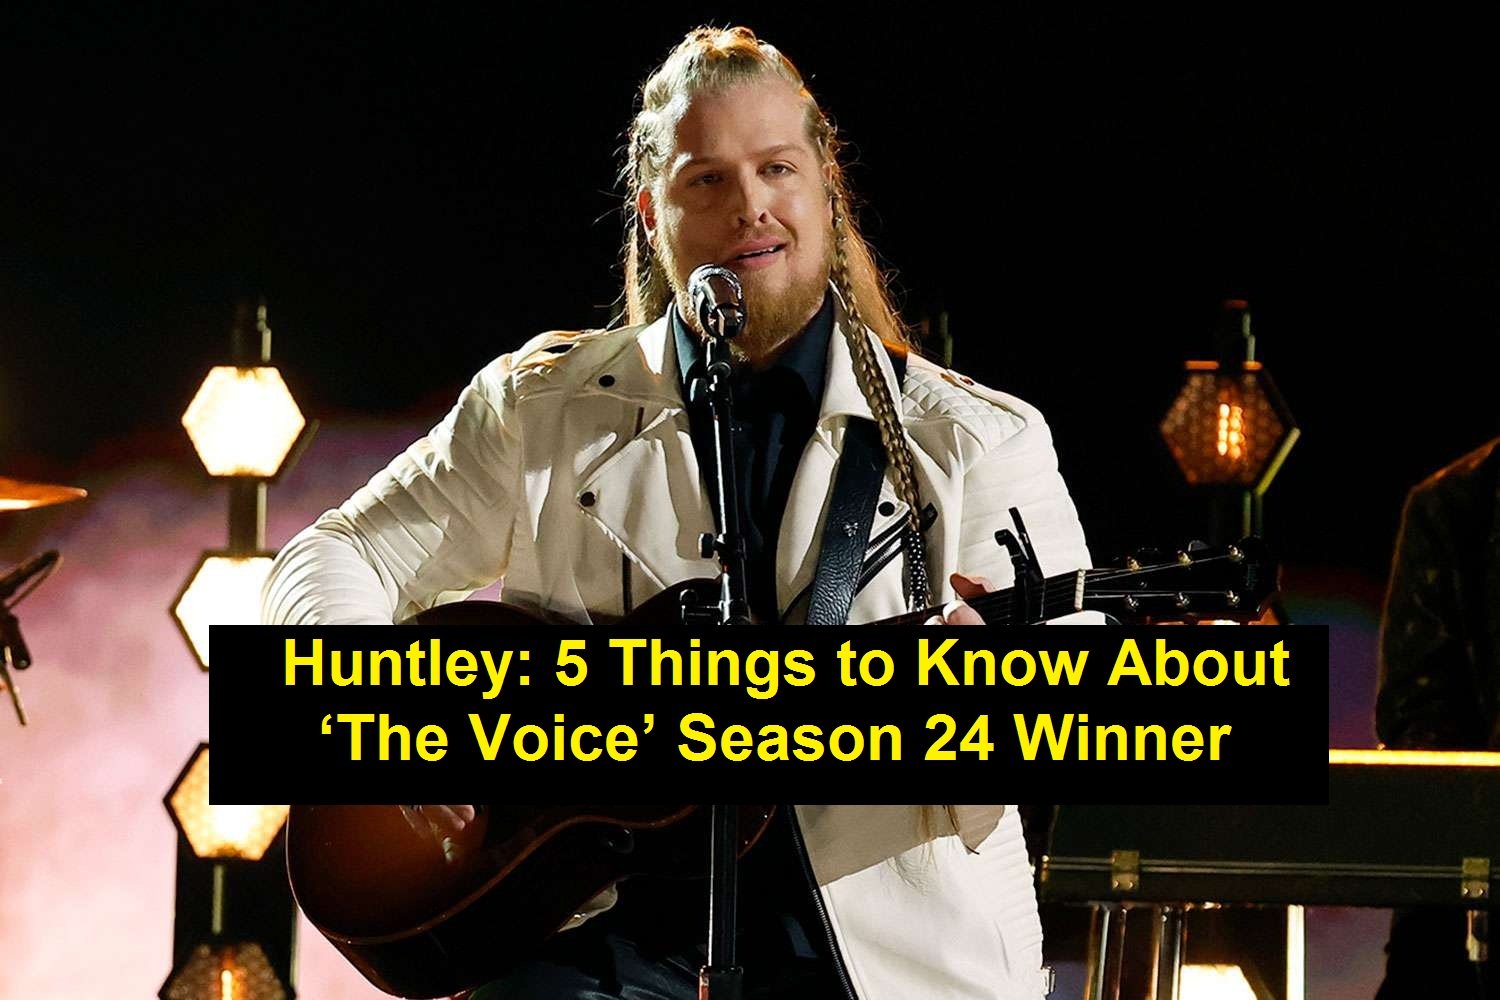 Huntley: 5 Things to Know About ‘The Voice’ Season 24 Winner